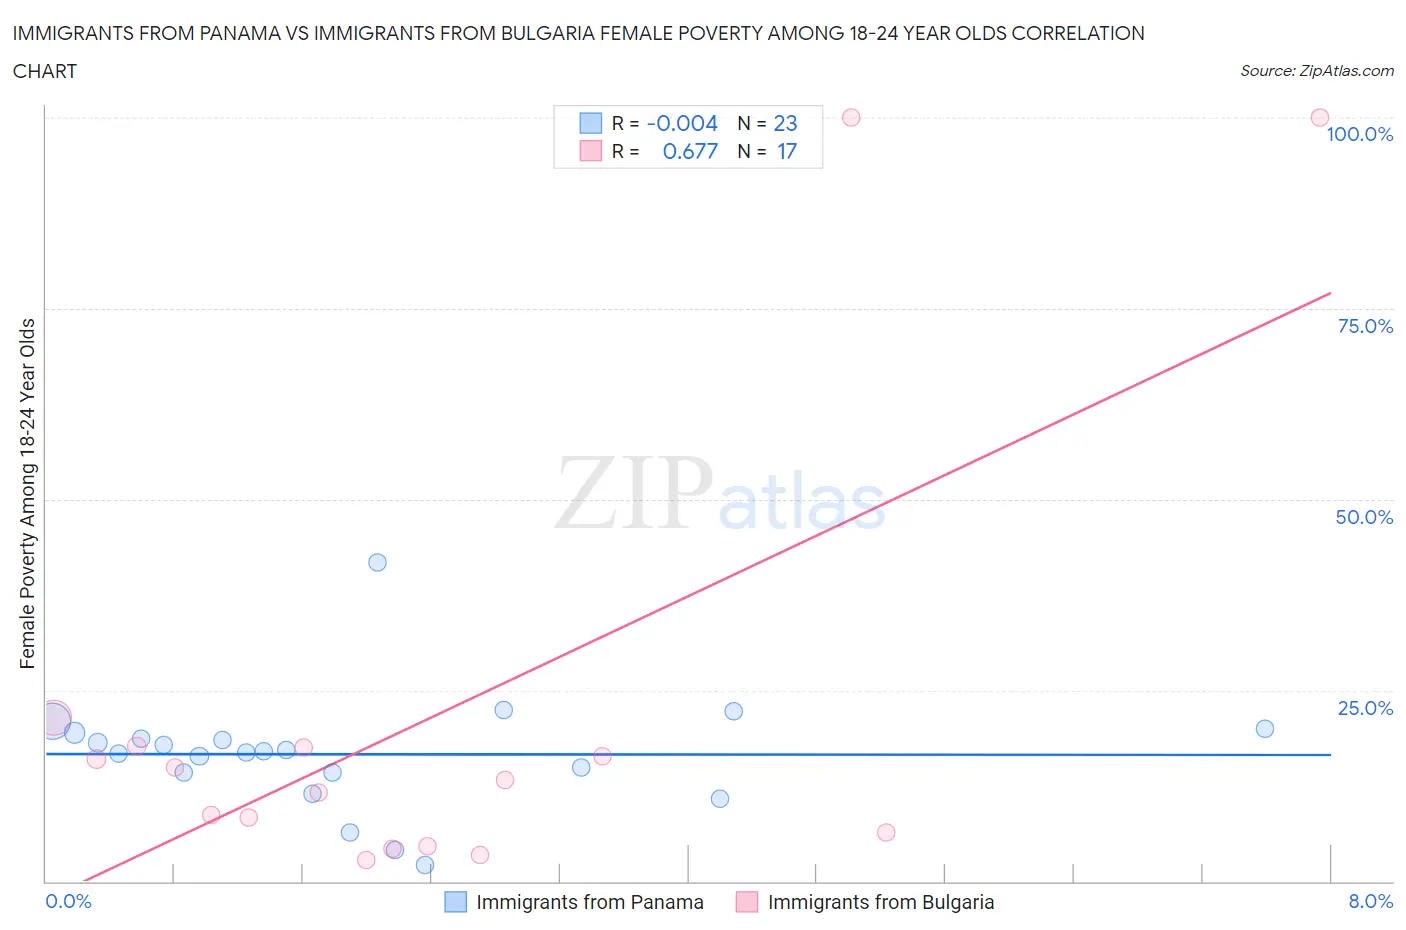 Immigrants from Panama vs Immigrants from Bulgaria Female Poverty Among 18-24 Year Olds